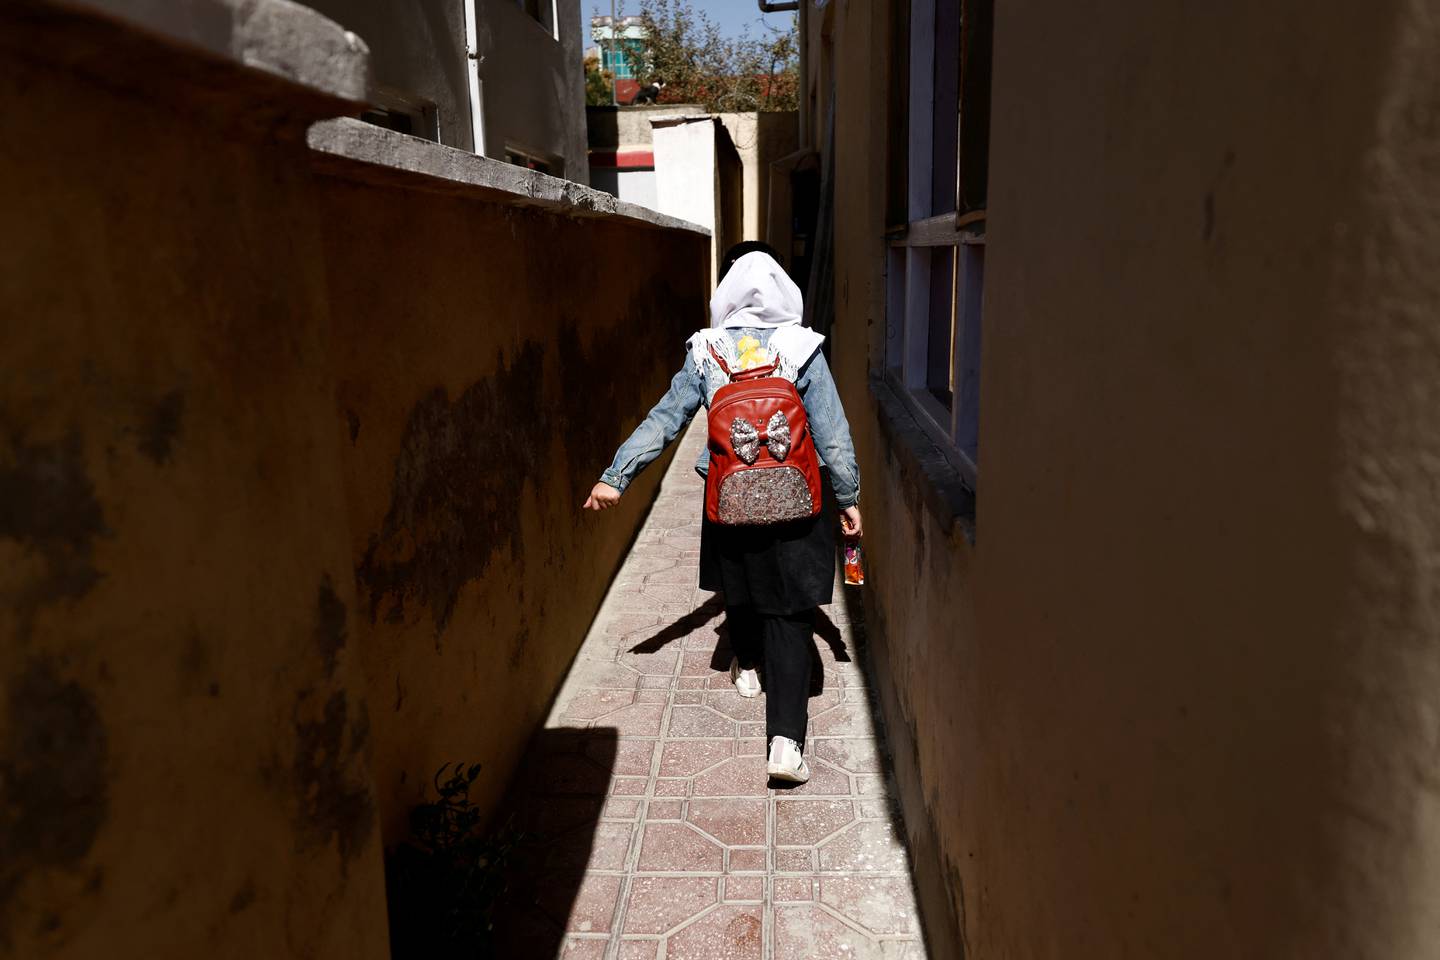 Hadia, 10, a fourth grade primary schoolgirl, walks back from school through an alleyway near her home in Kabul, in October 2021. Reuters